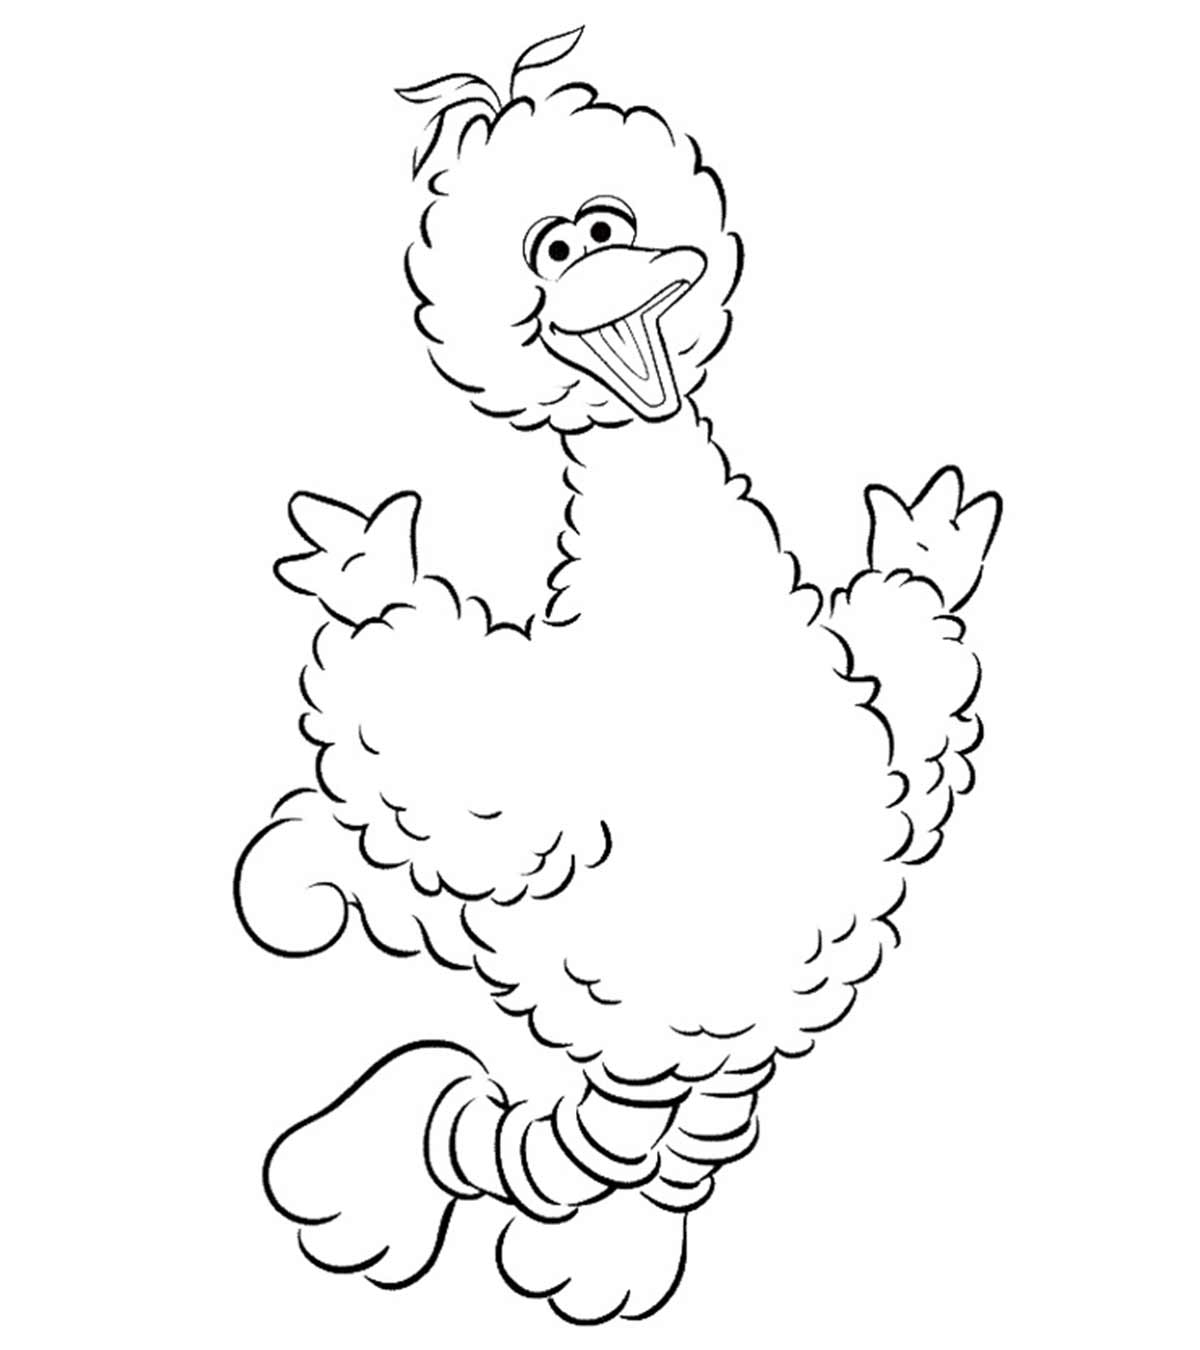 Top 25 Colorful Big Bird Coloring Pages For Your Little One